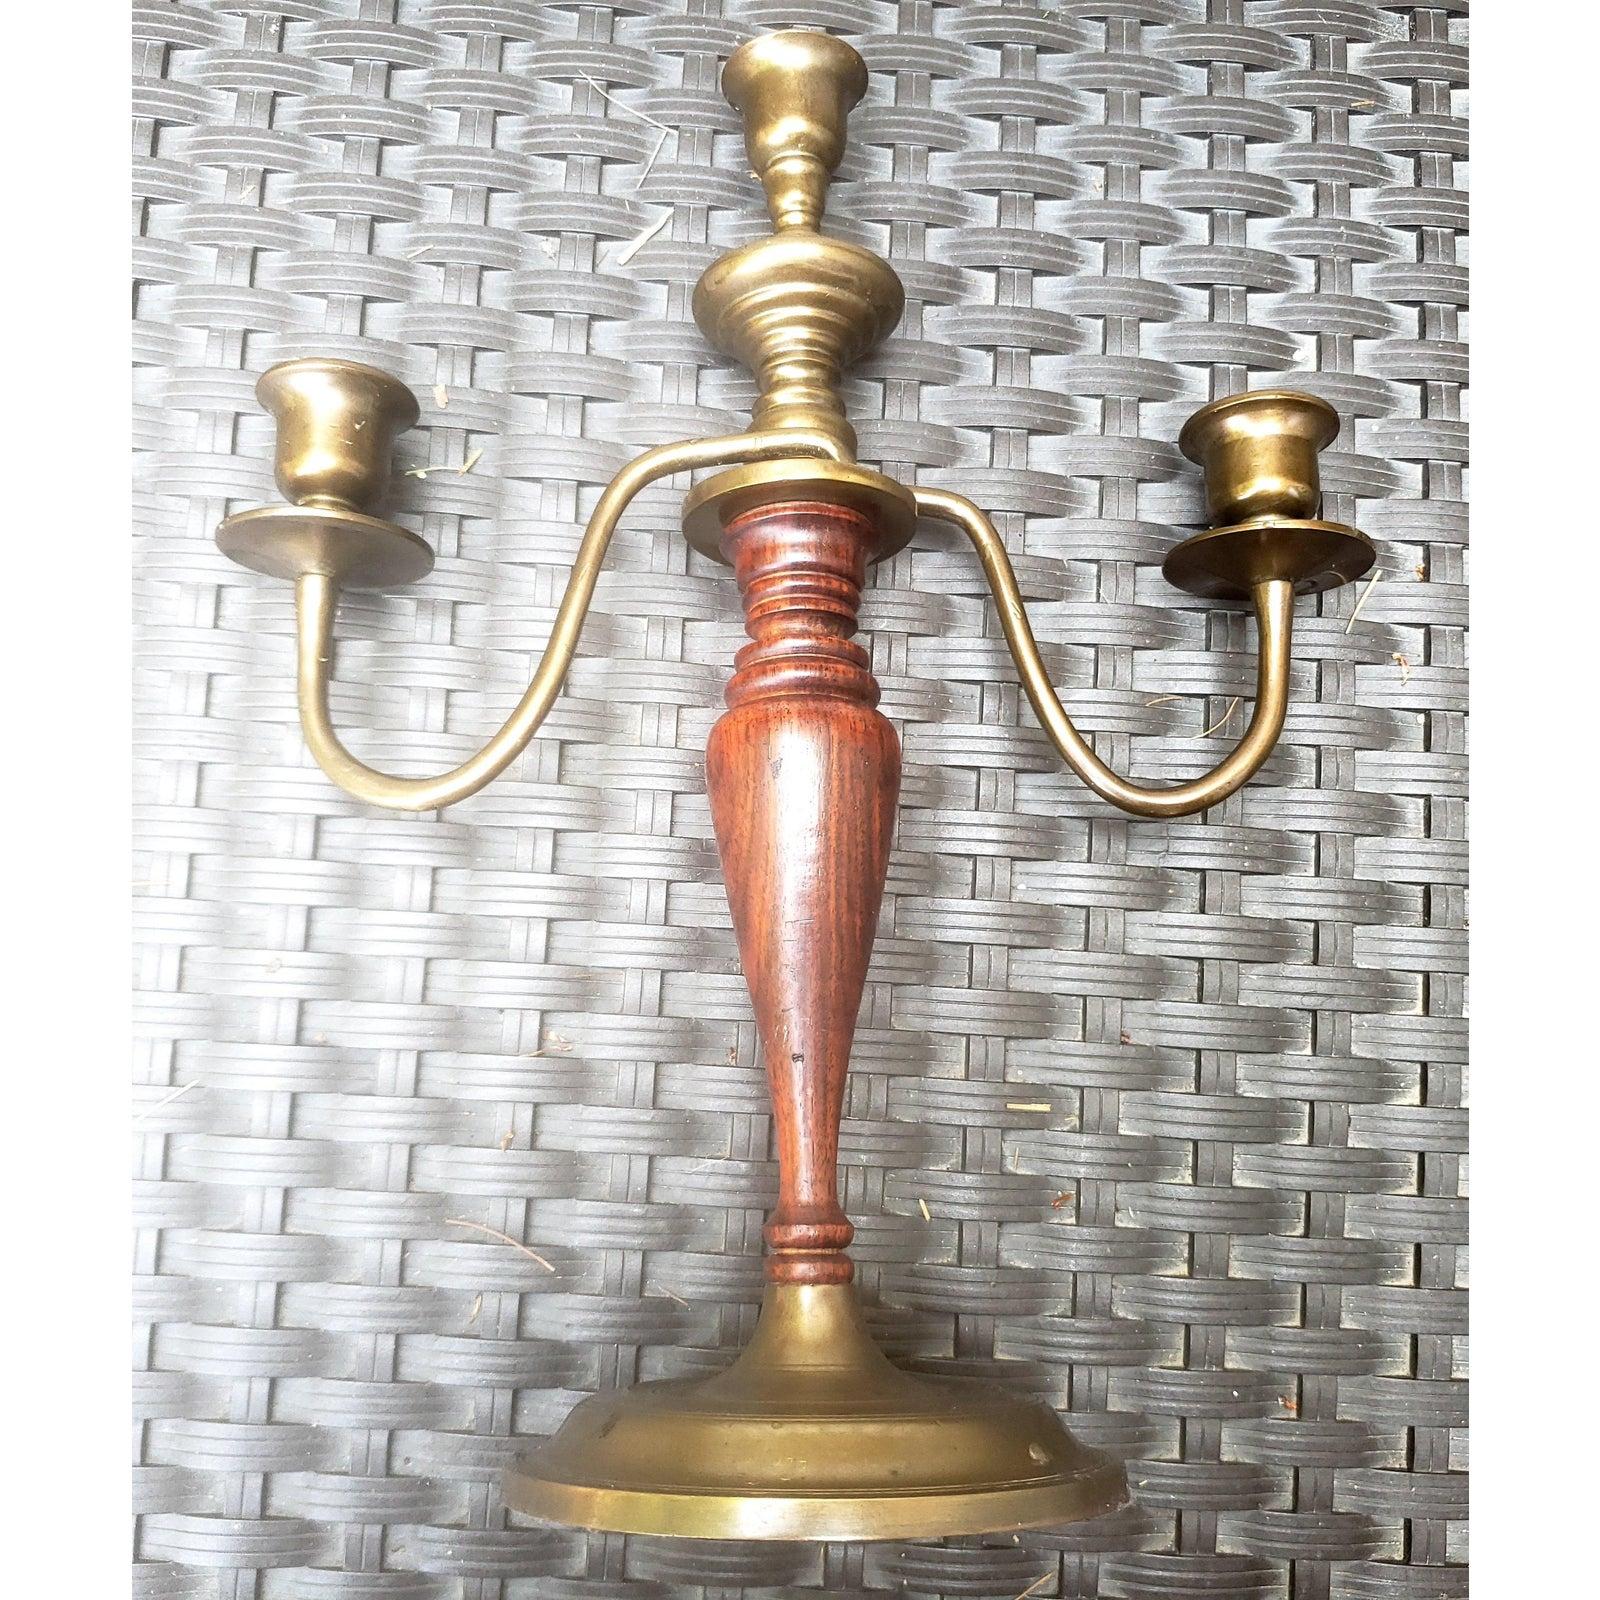 19th Century Mahogany and Brass Candelabras, a Pair For Sale 1